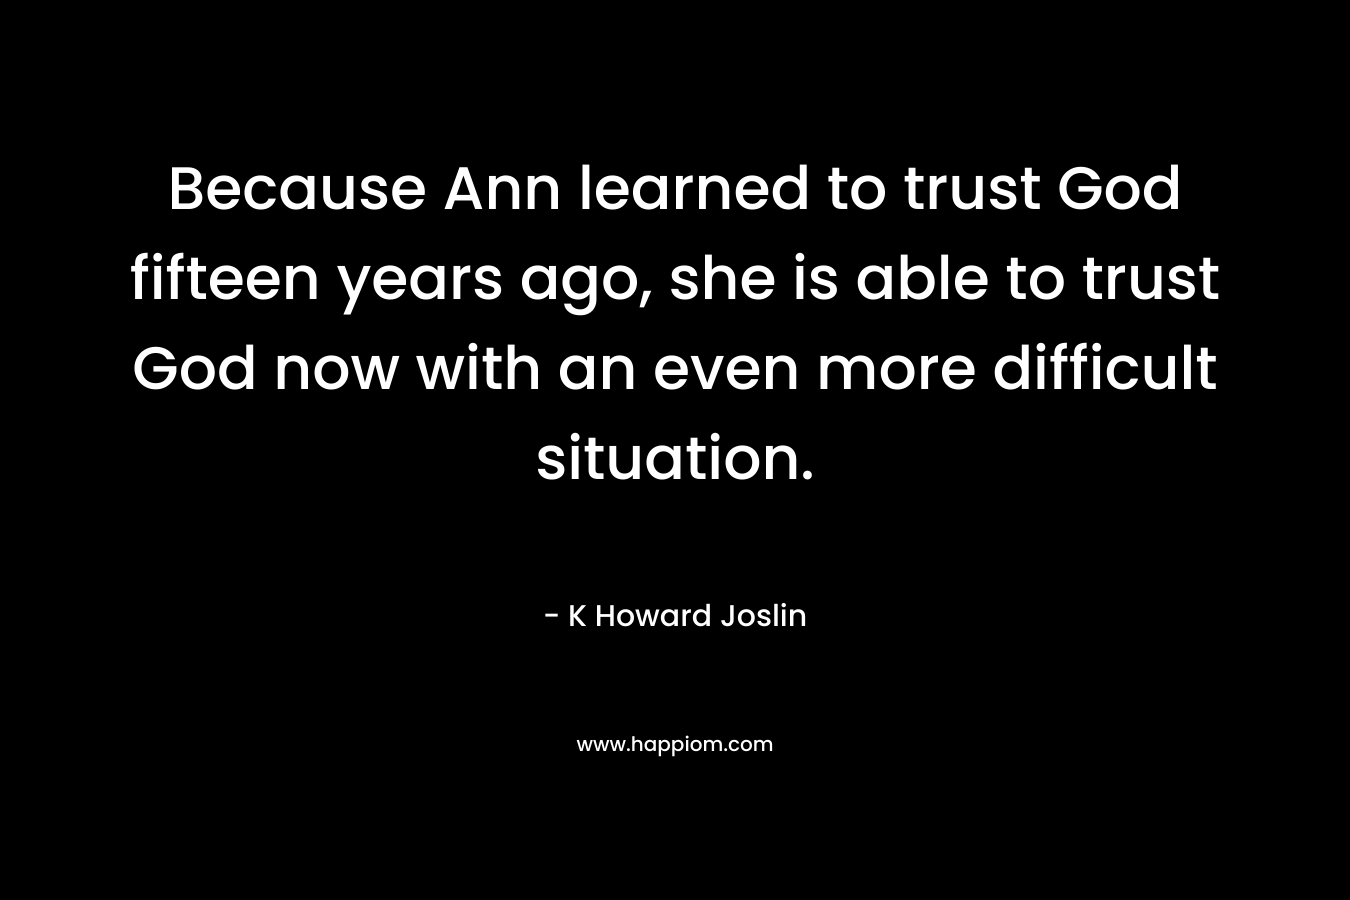 Because Ann learned to trust God fifteen years ago, she is able to trust God now with an even more difficult situation.